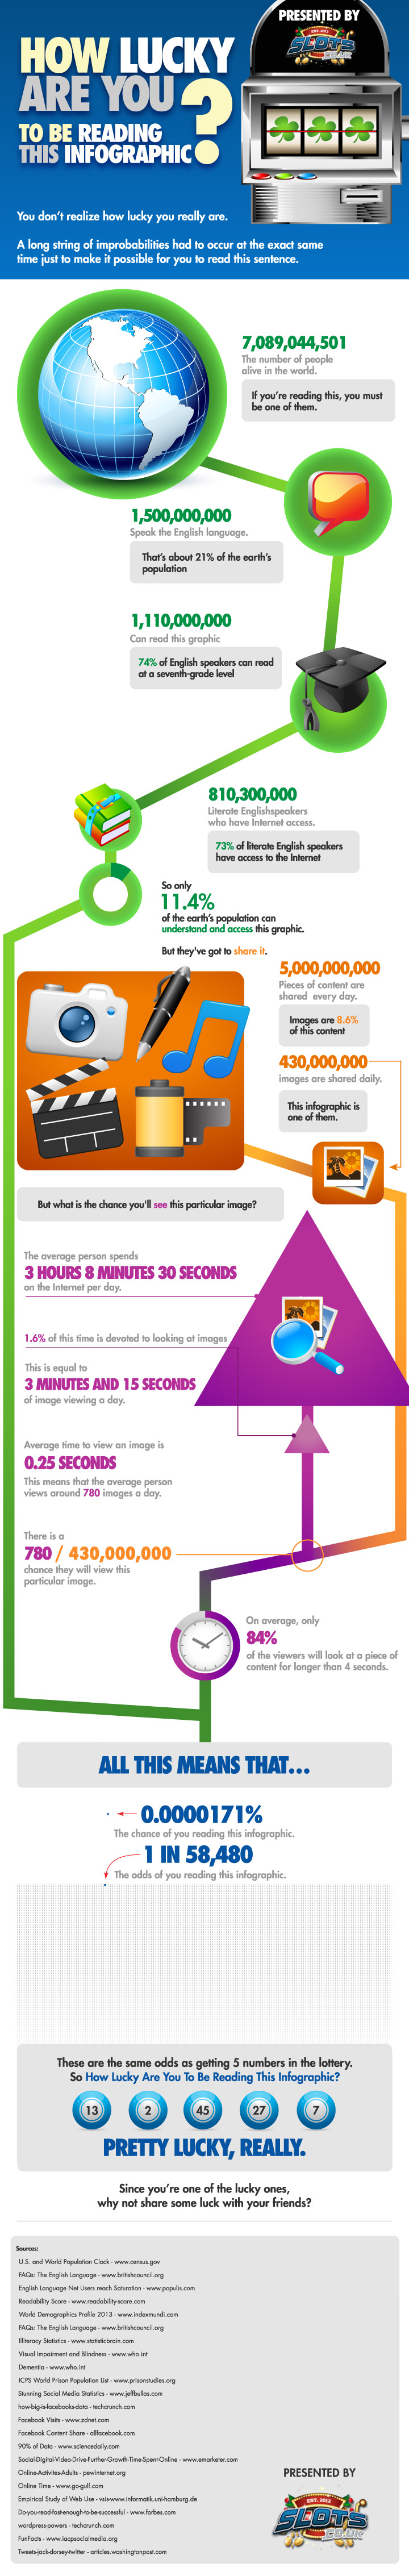 Content Consumption Odds-Infographic